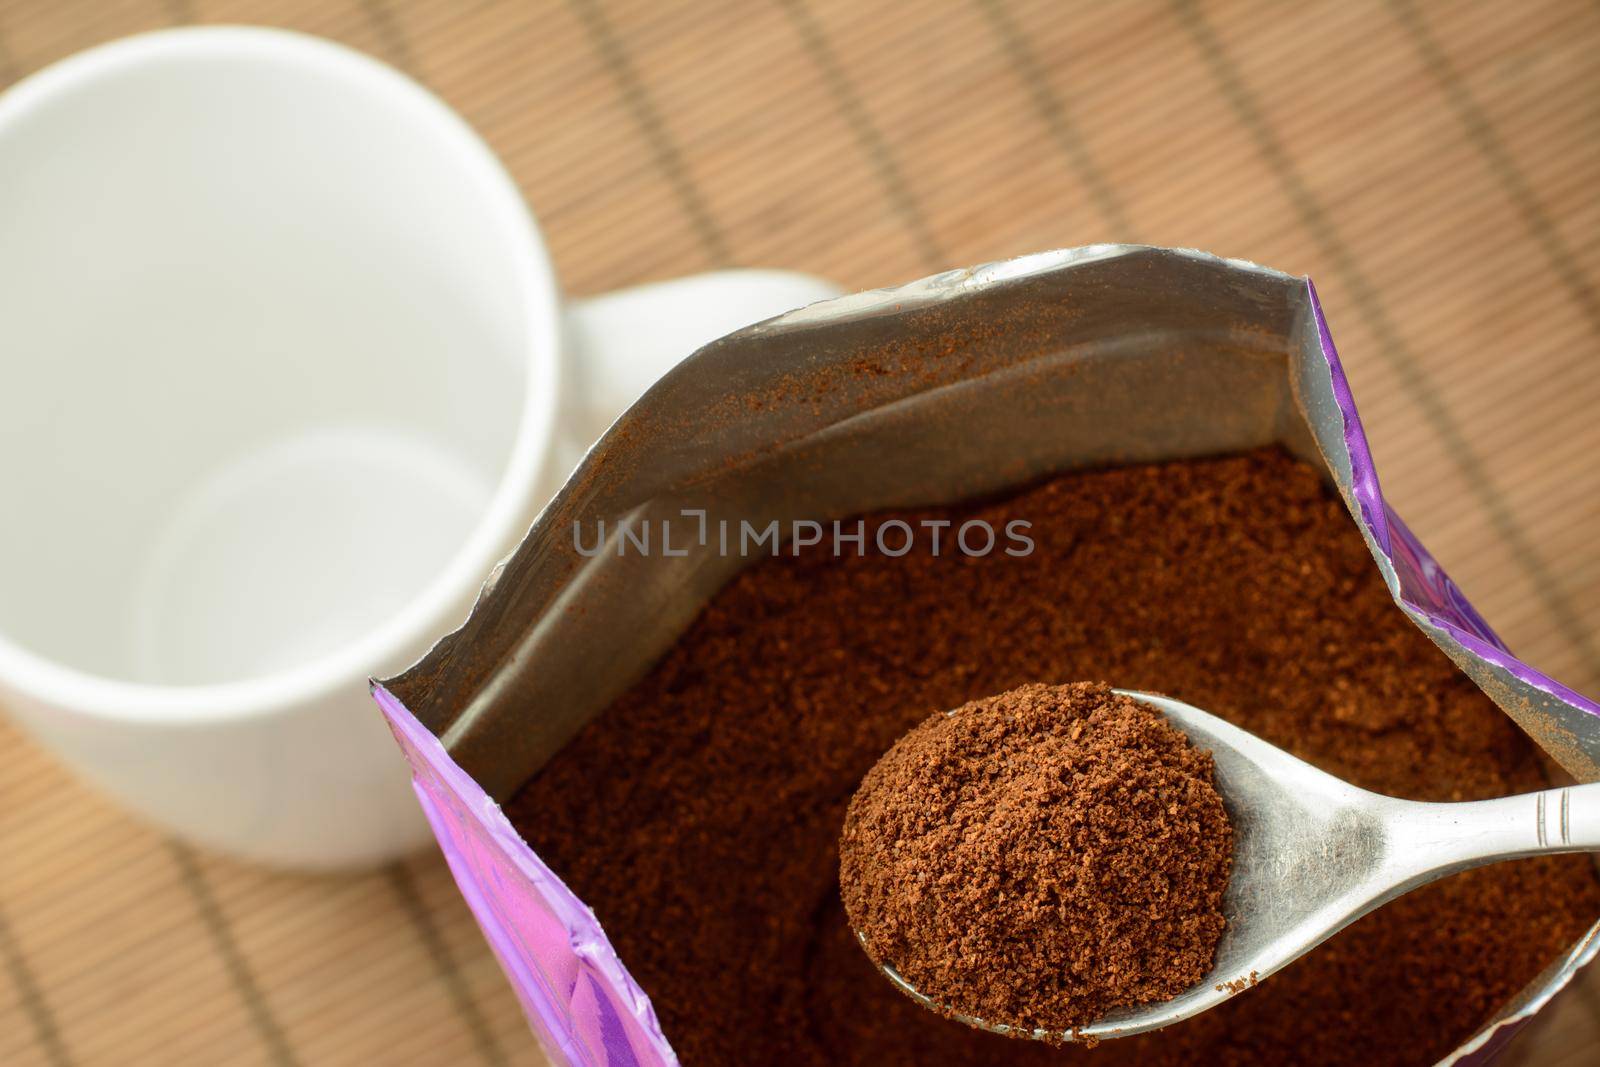 Spoon with some ground coffee against a big pack of coffee near the empty cup